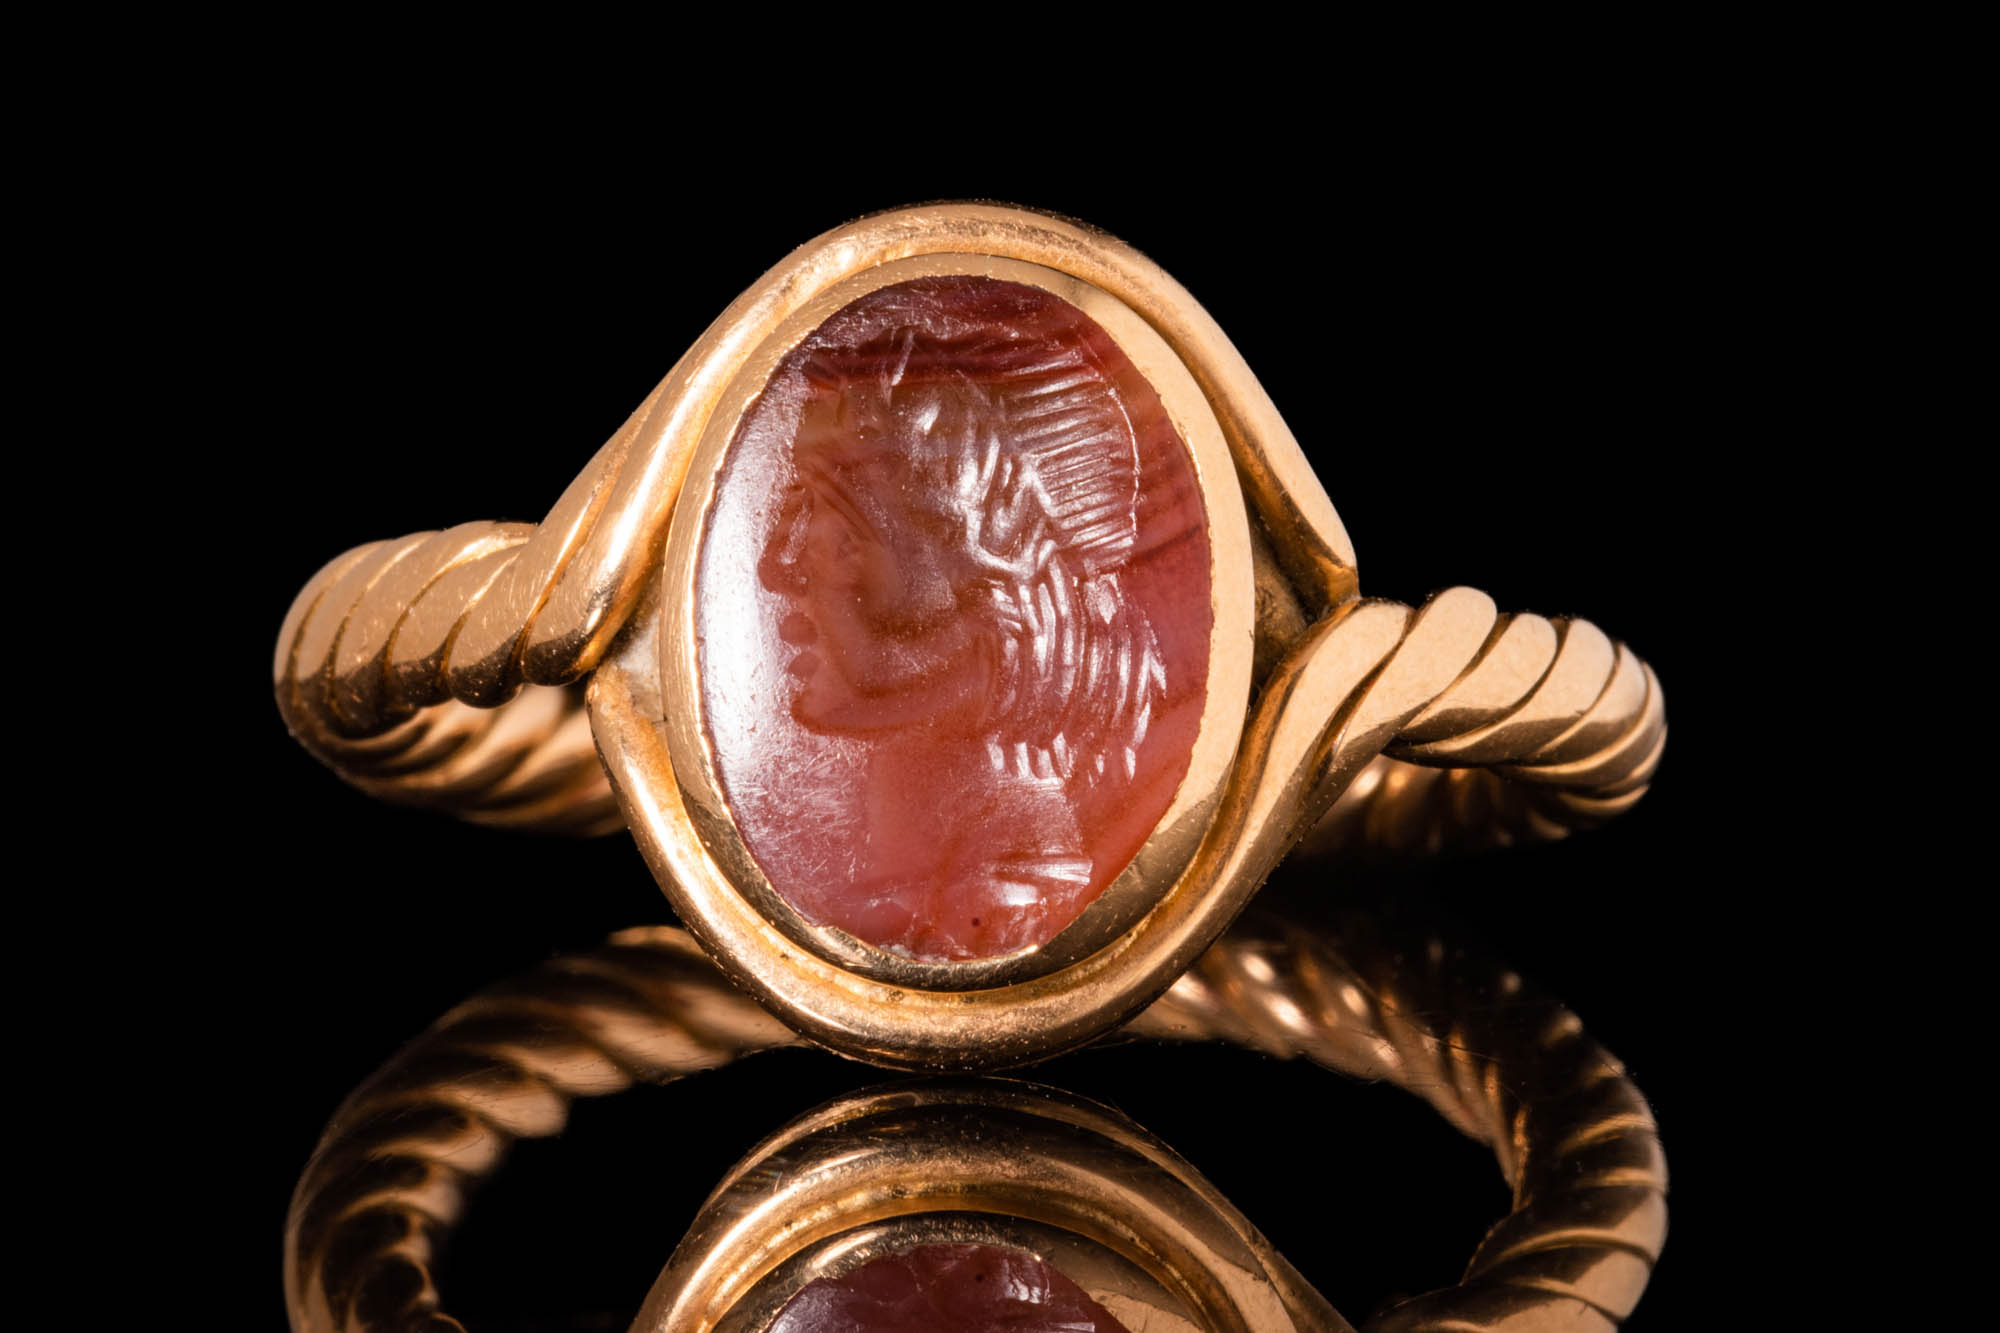 ROMAN CARNELIAN INTAGLIO DEPICTING ALEXANDER THE GREAT IN GOLD RING - Image 2 of 5